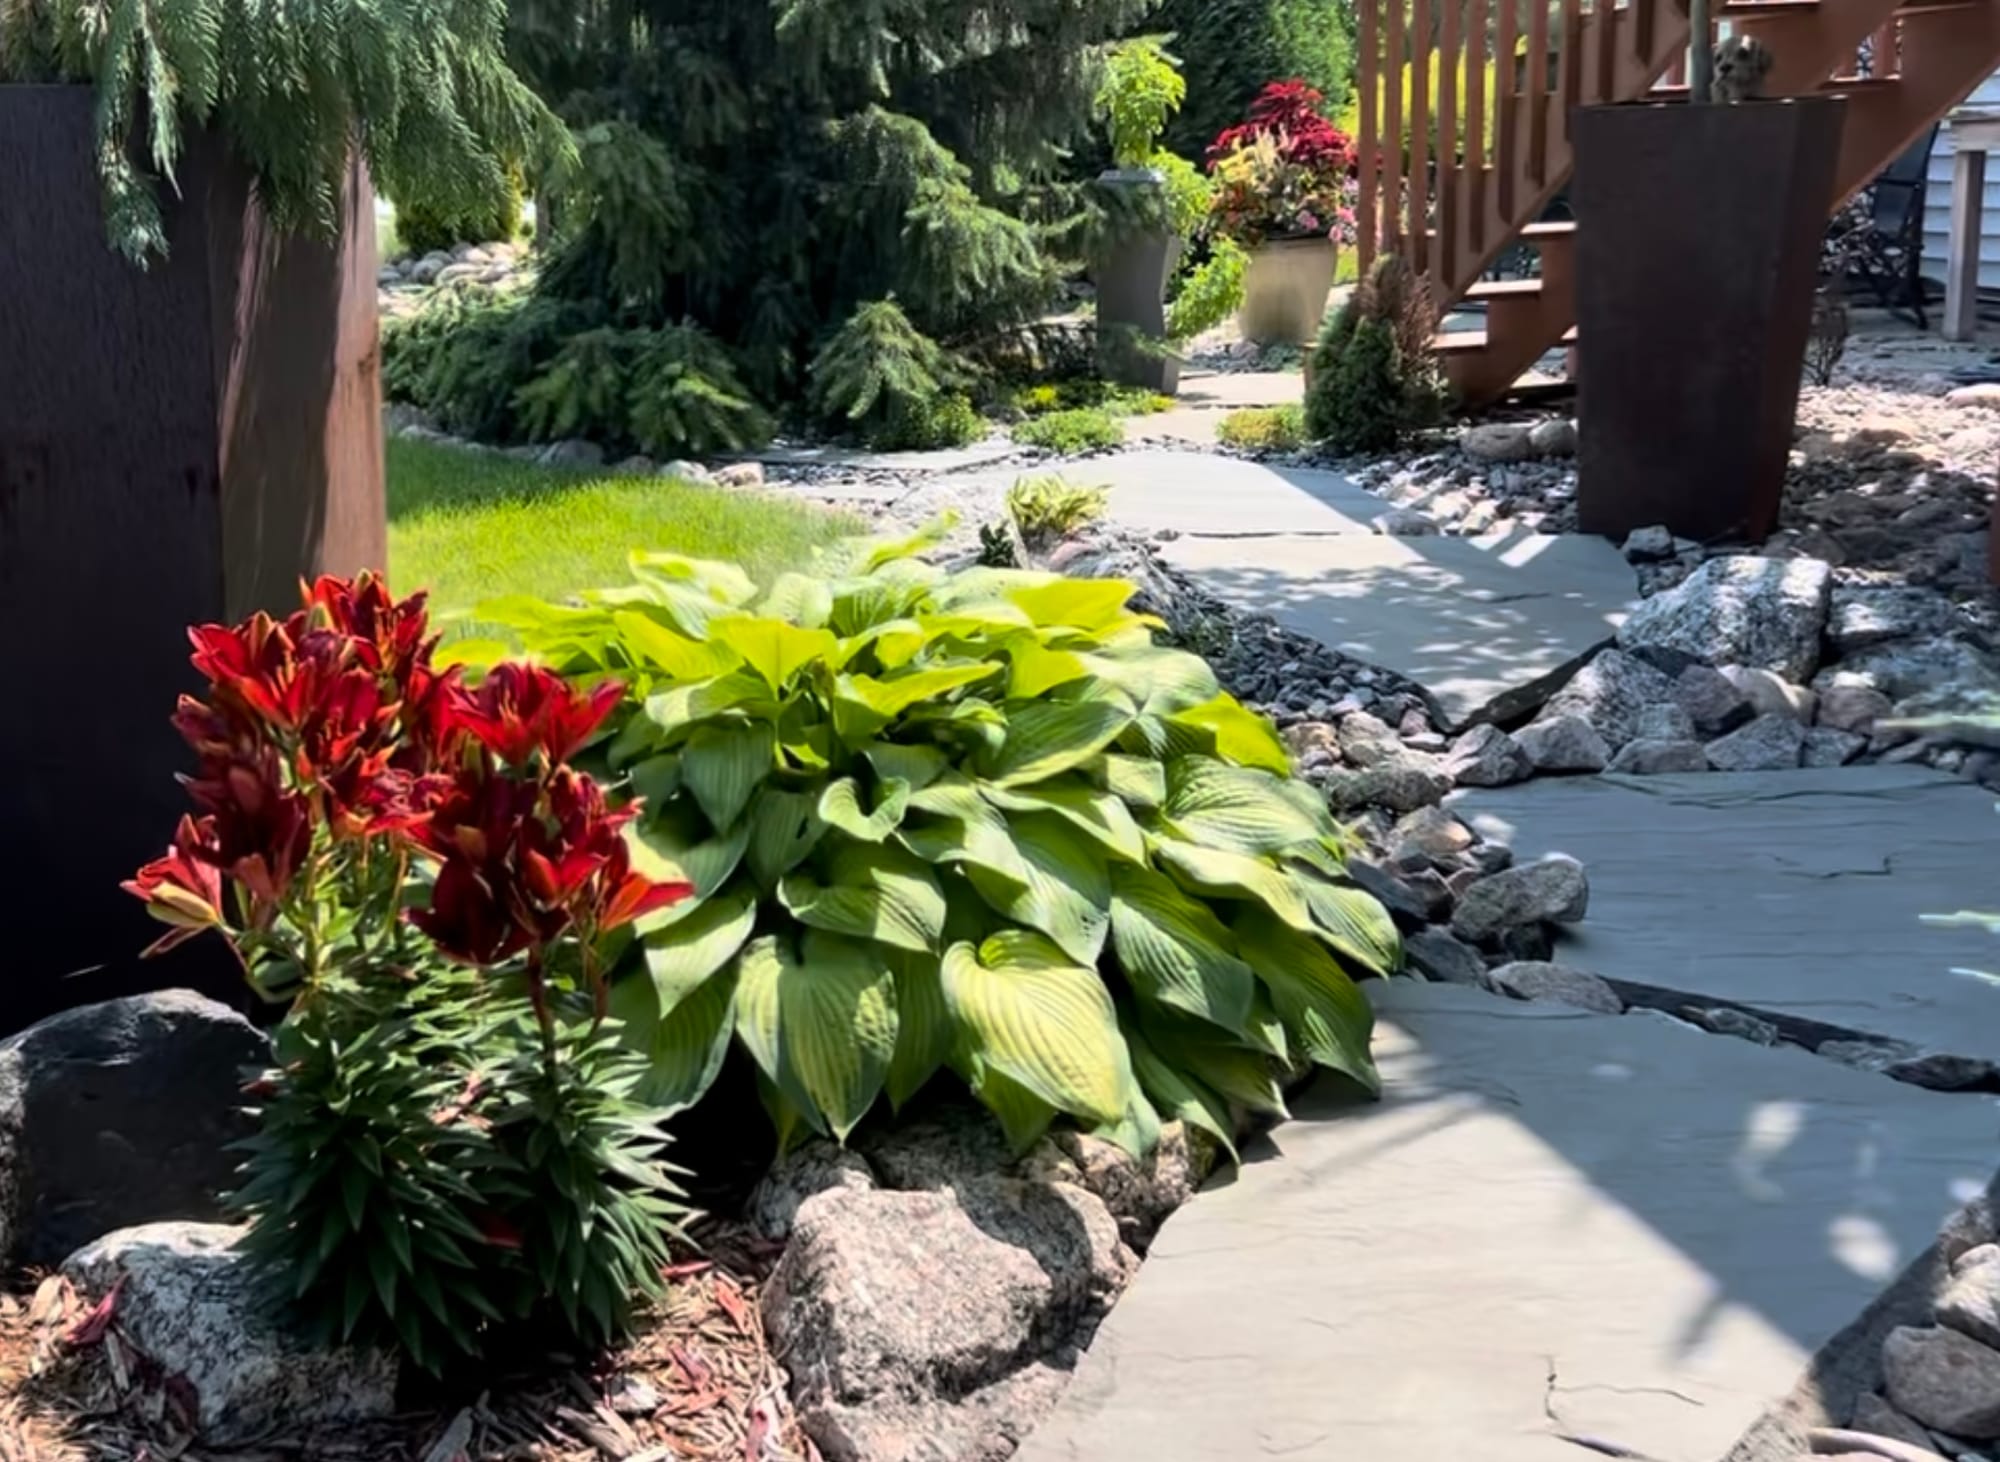 Landscaping Ideas | Plants, Pathway, Rustic Containers